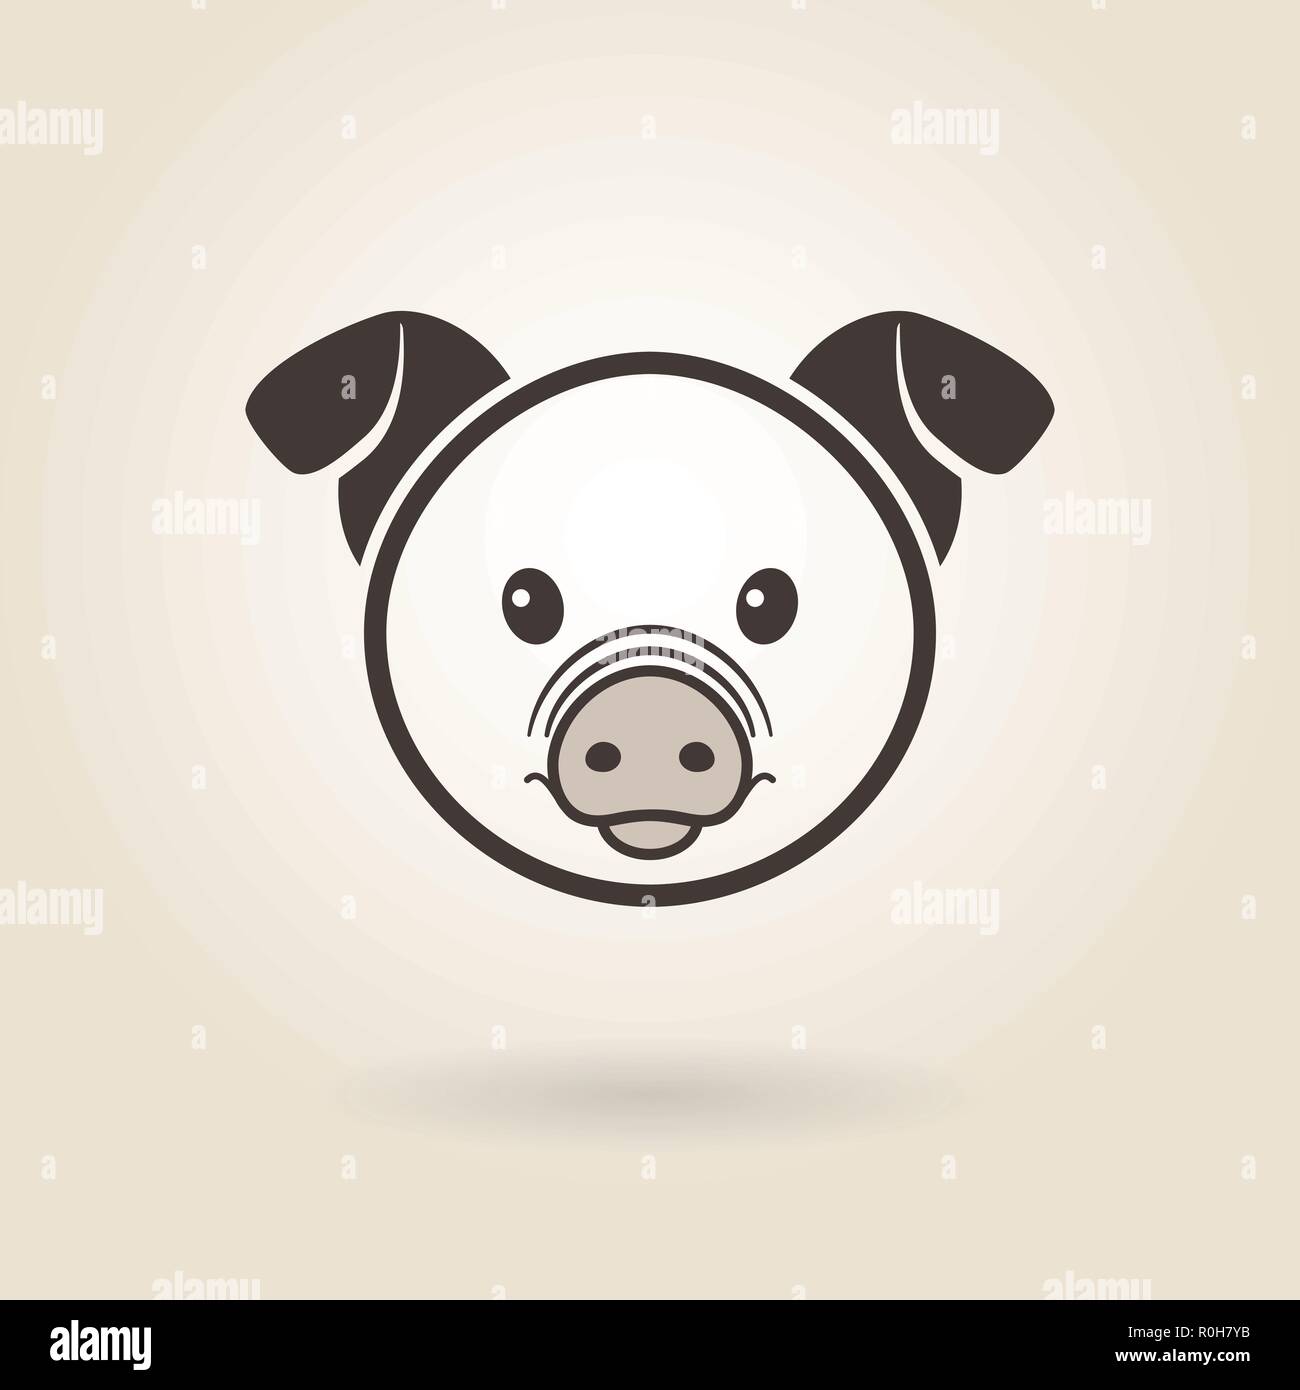 pig icon on a light background Stock Vector